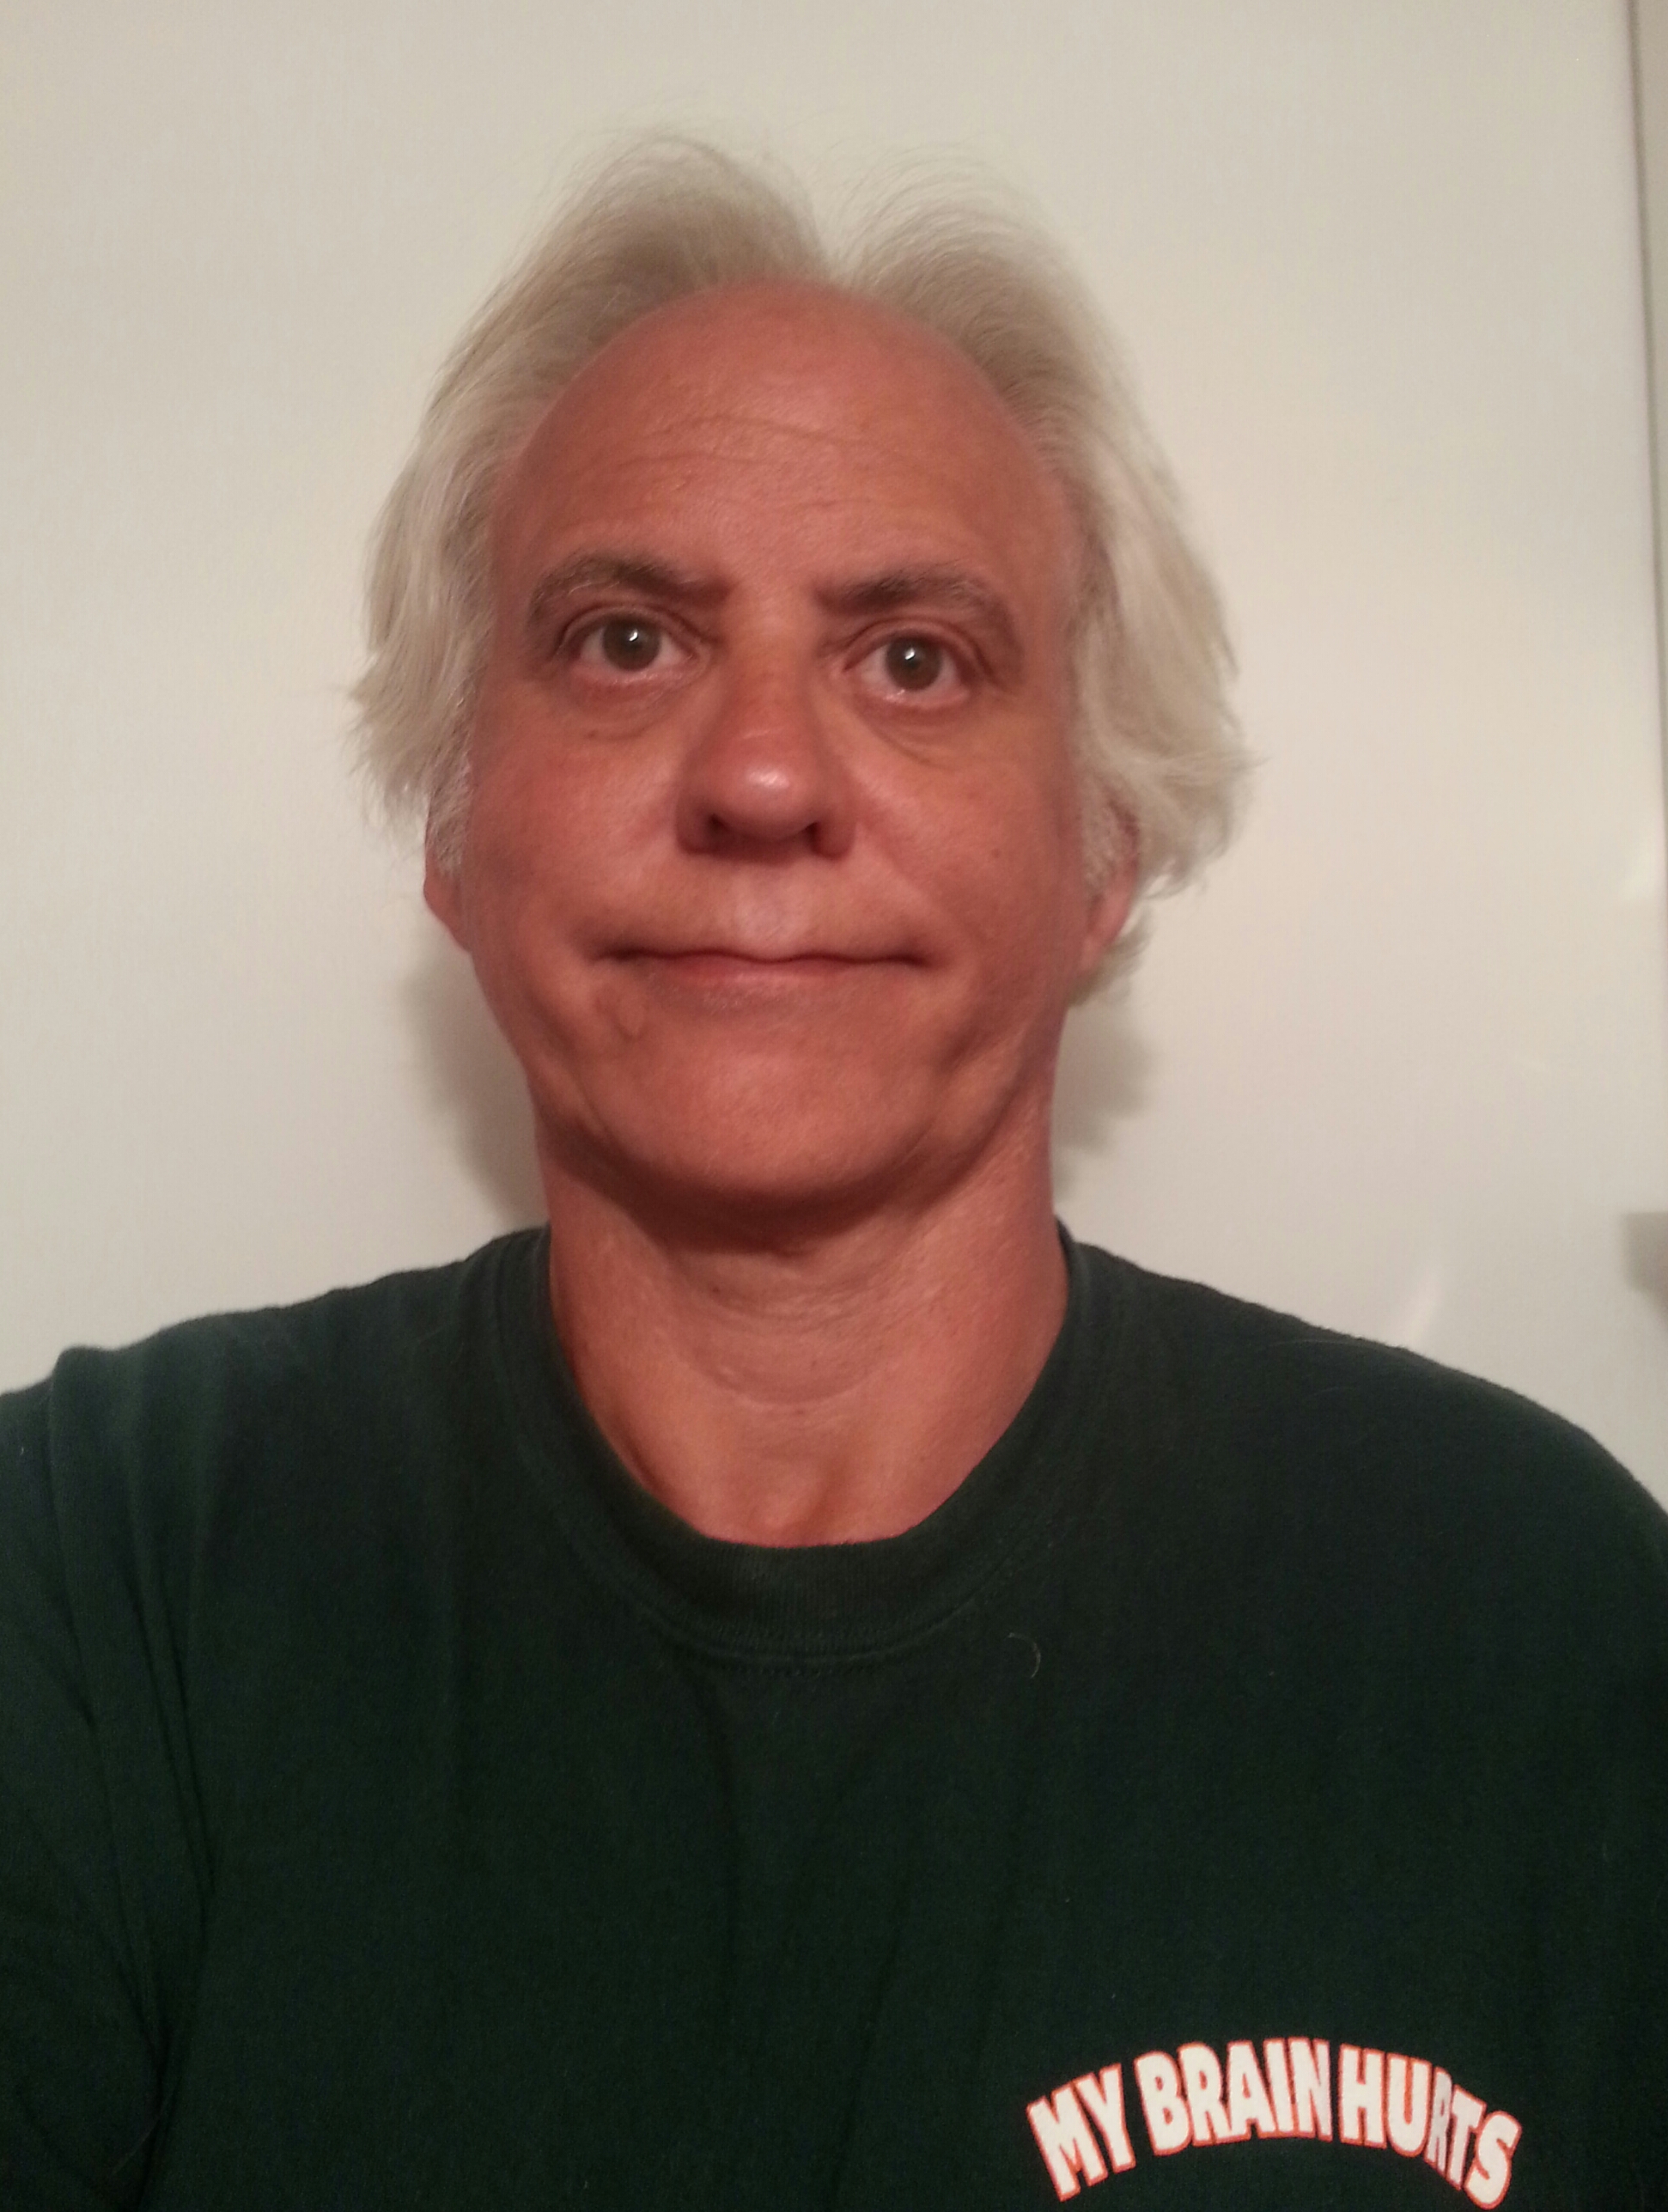 Passport selfie attempt, while assisting recovering Mom in Punta Gorda, Florida, March 2014. Fit to be tied? Look inspired by American medical warehousing system. OMG, camomile tea works! Prepping for cancelled European travel plans Cannes 2014.